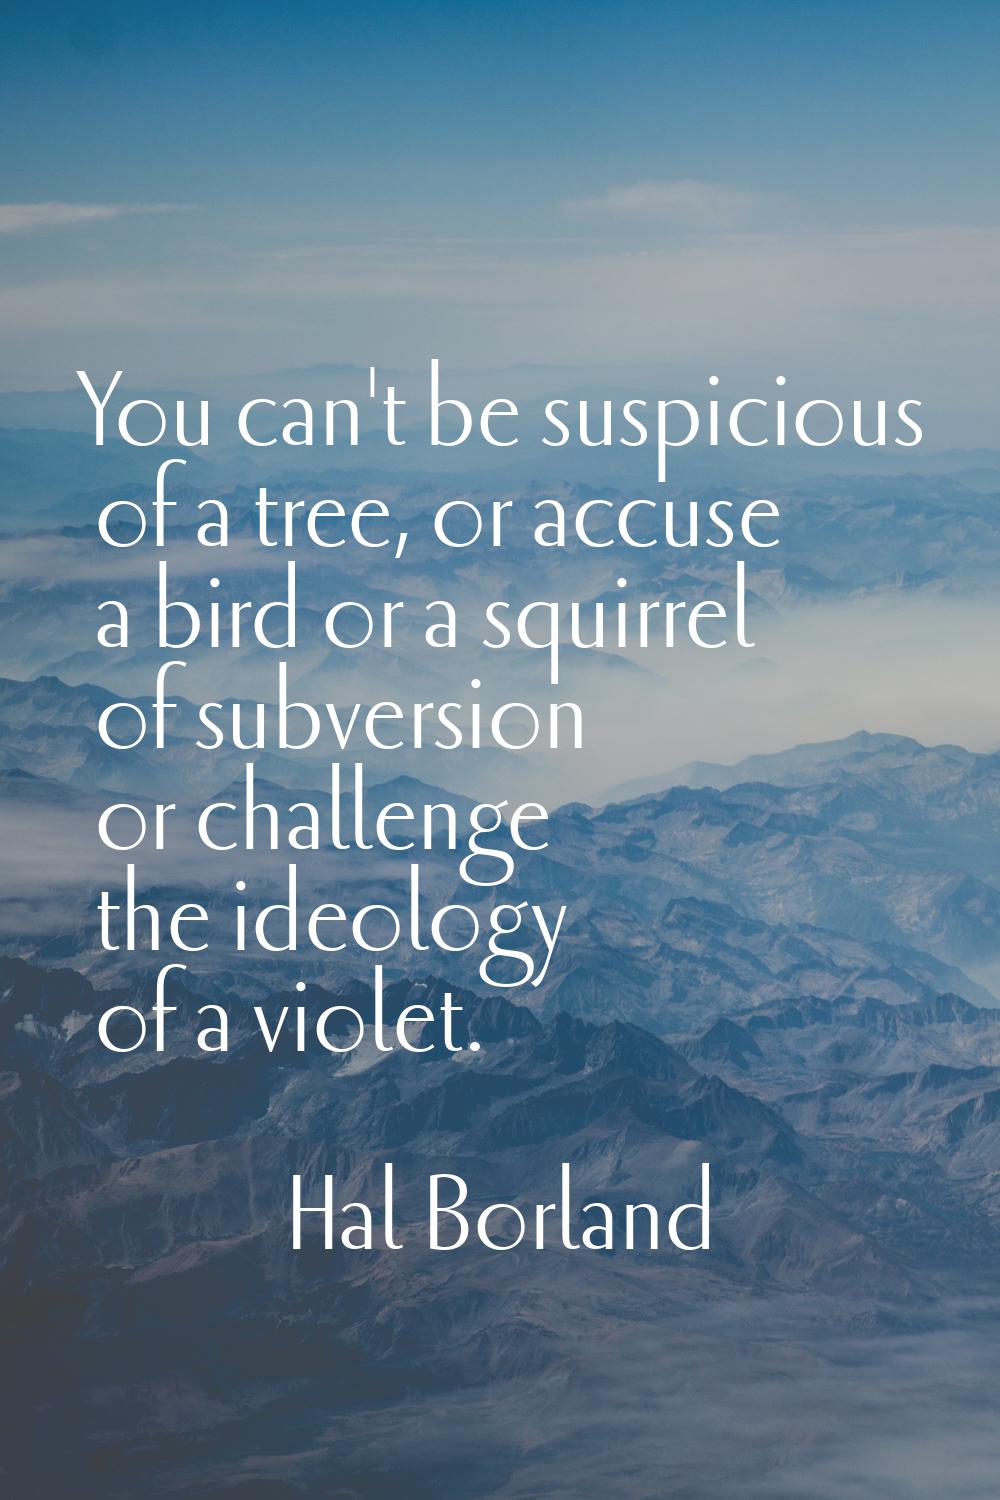 You can't be suspicious of a tree, or accuse a bird or a squirrel of subversion or challenge the id